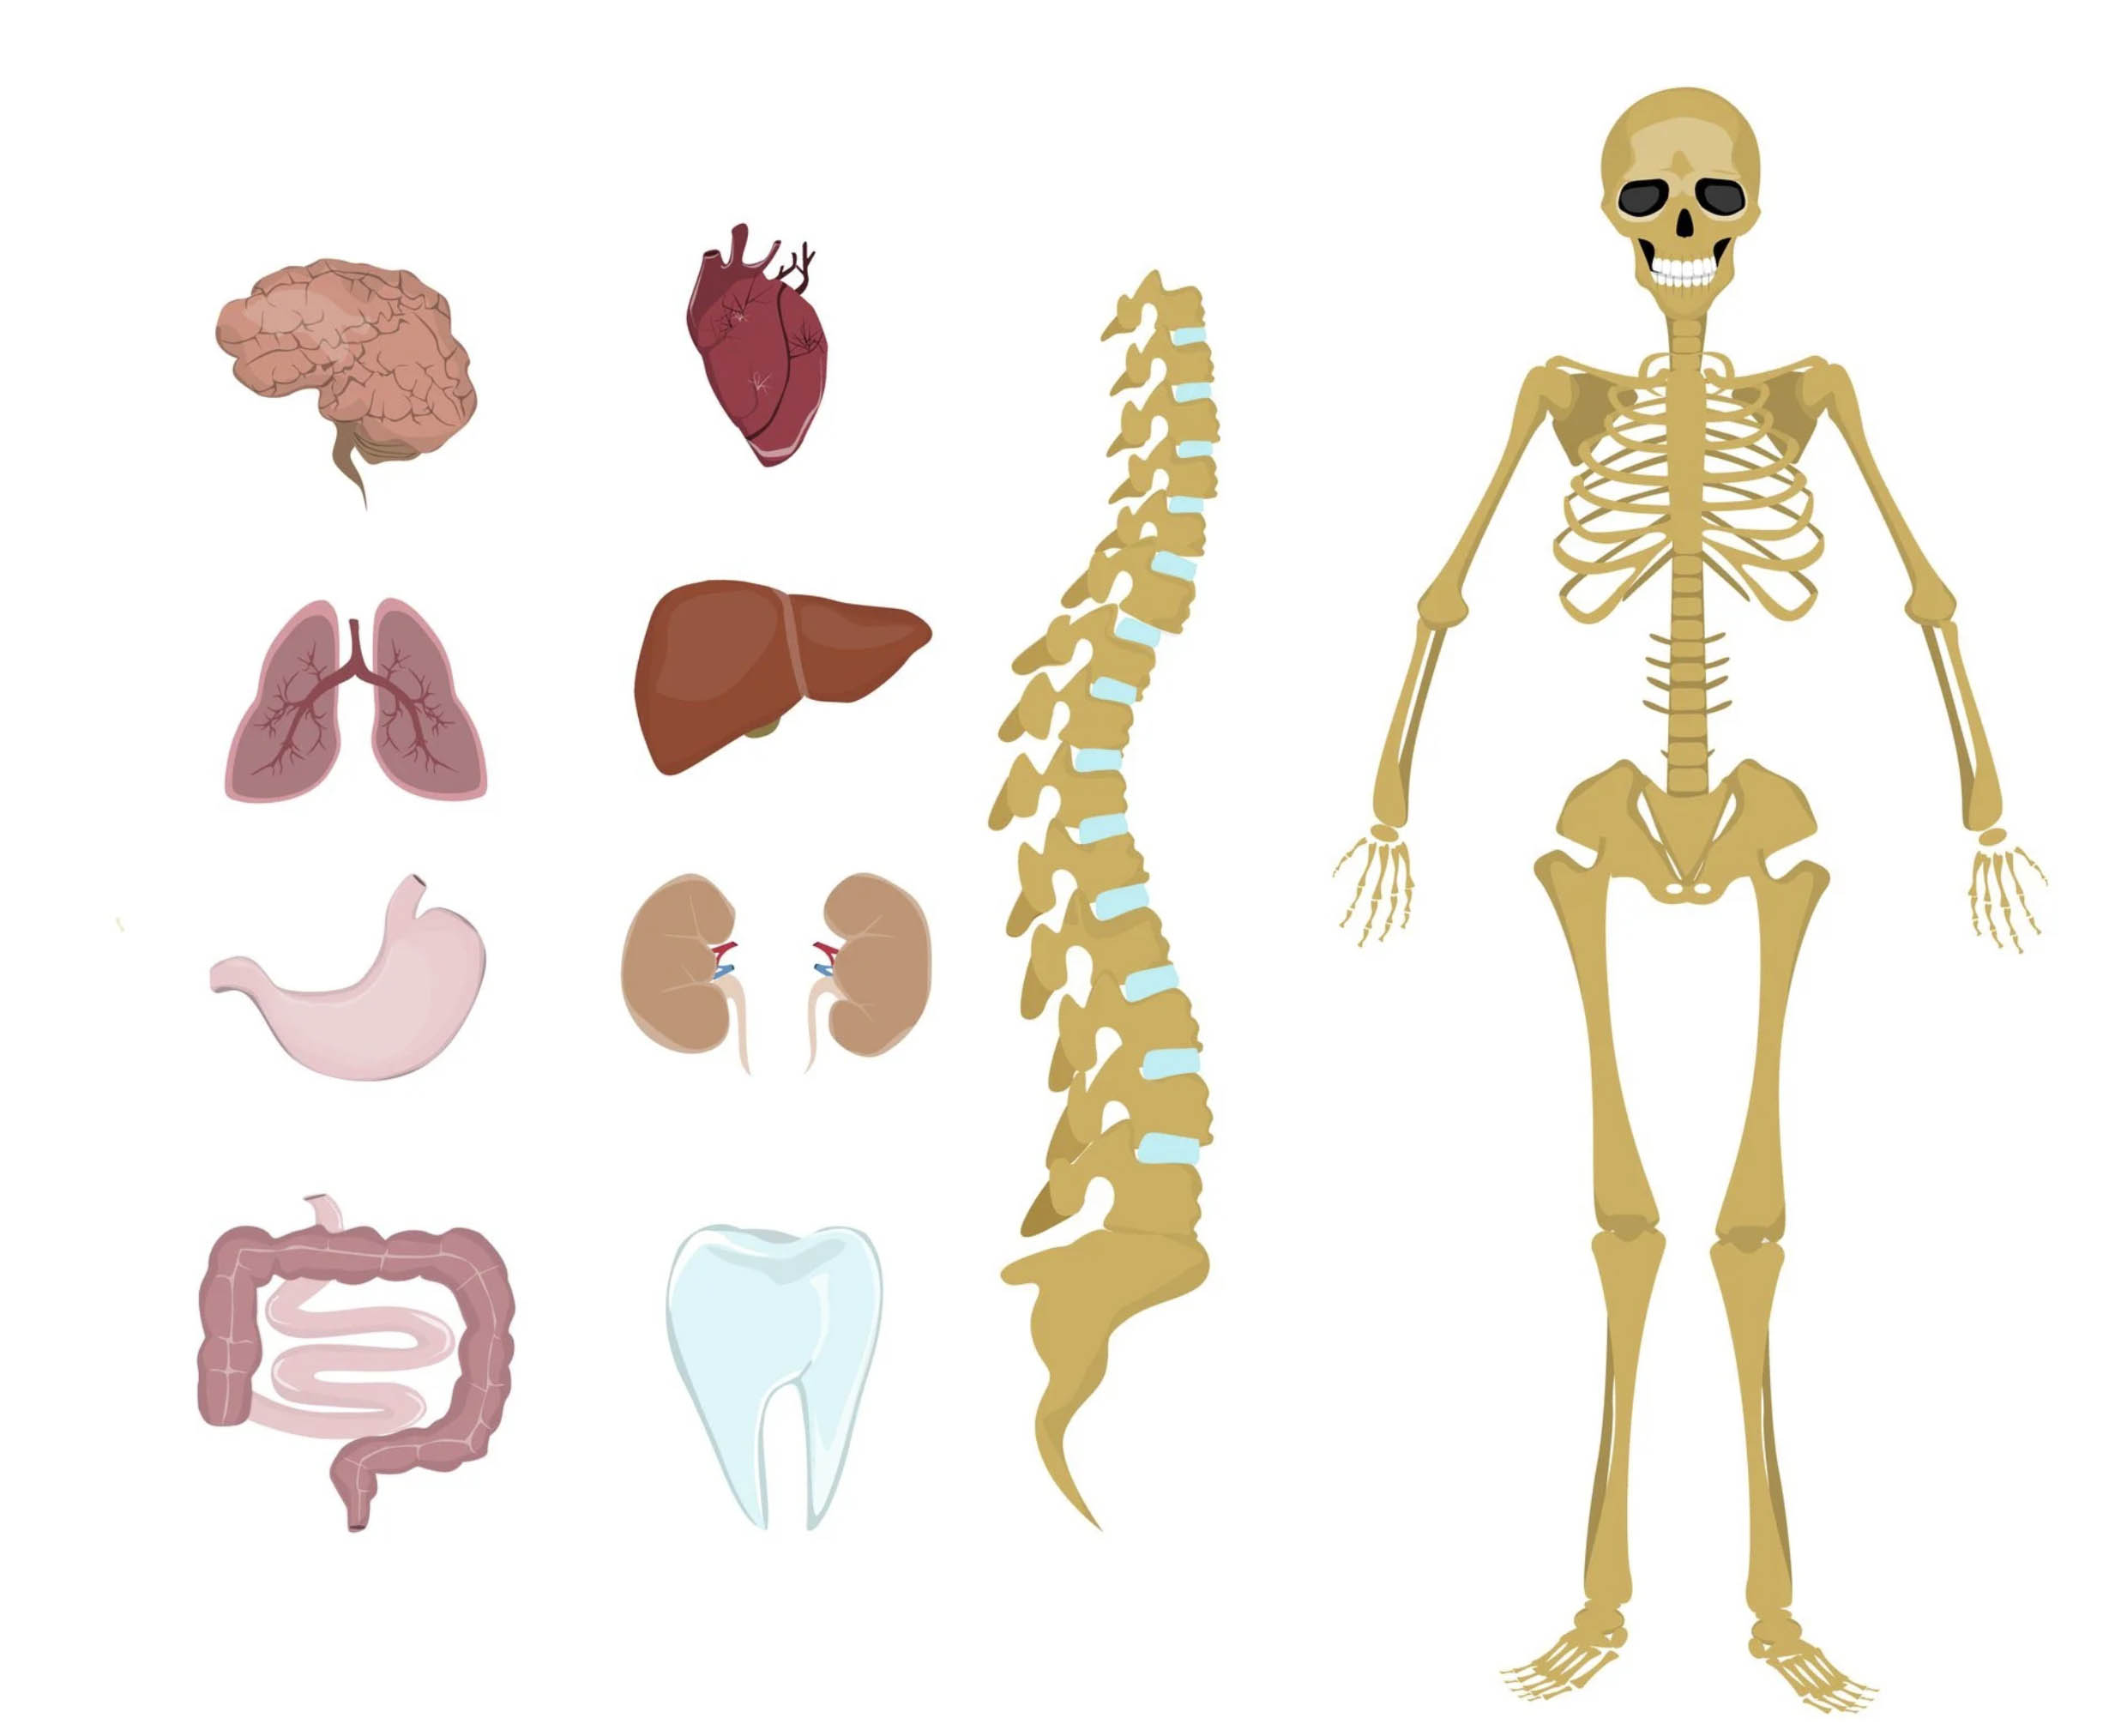 ACGrace - Skeleton and organs of the human body vector | price 1 credit usd $1.